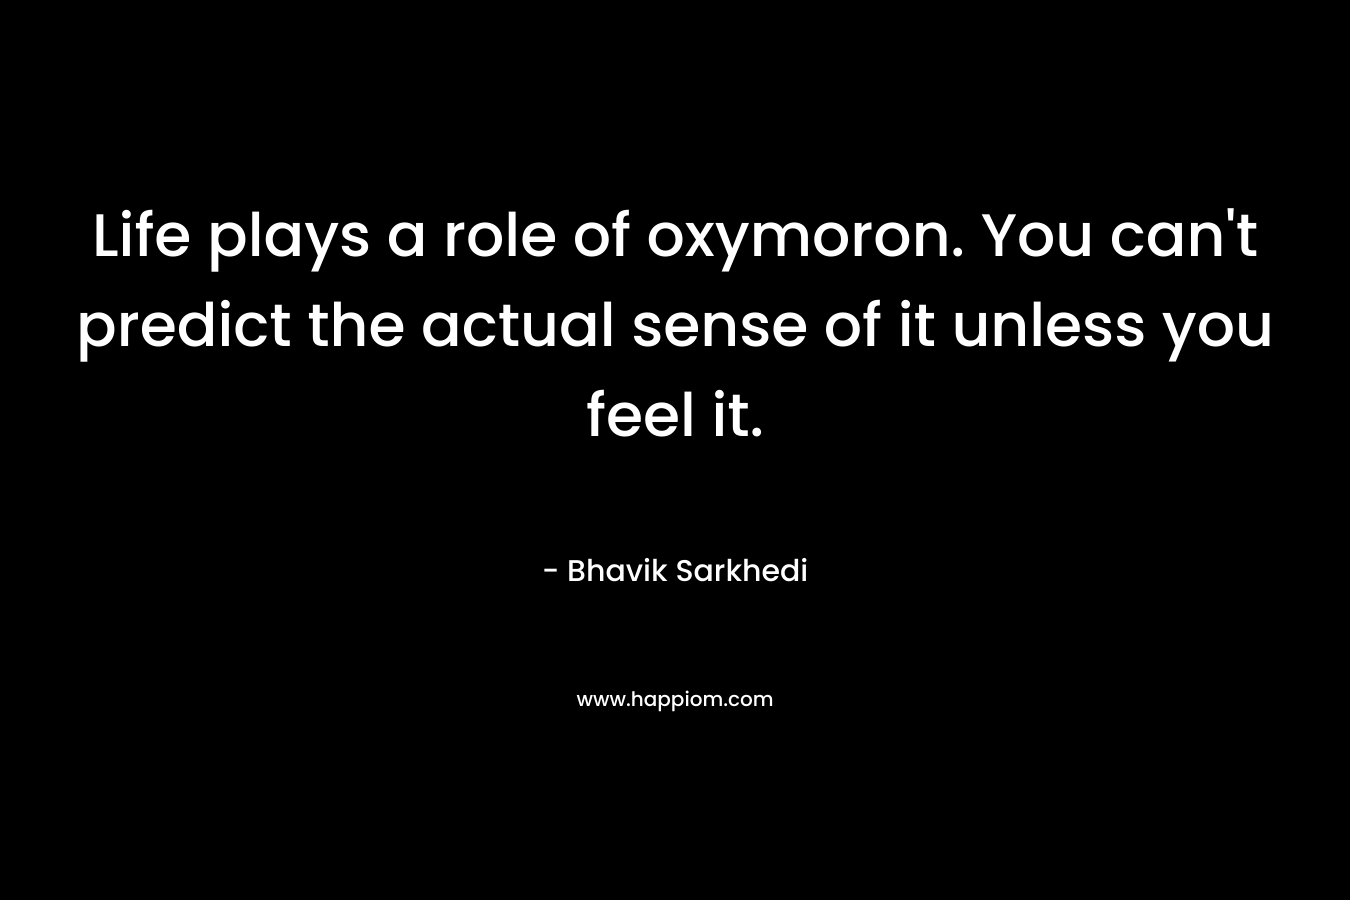 Life plays a role of oxymoron. You can't predict the actual sense of it unless you feel it.